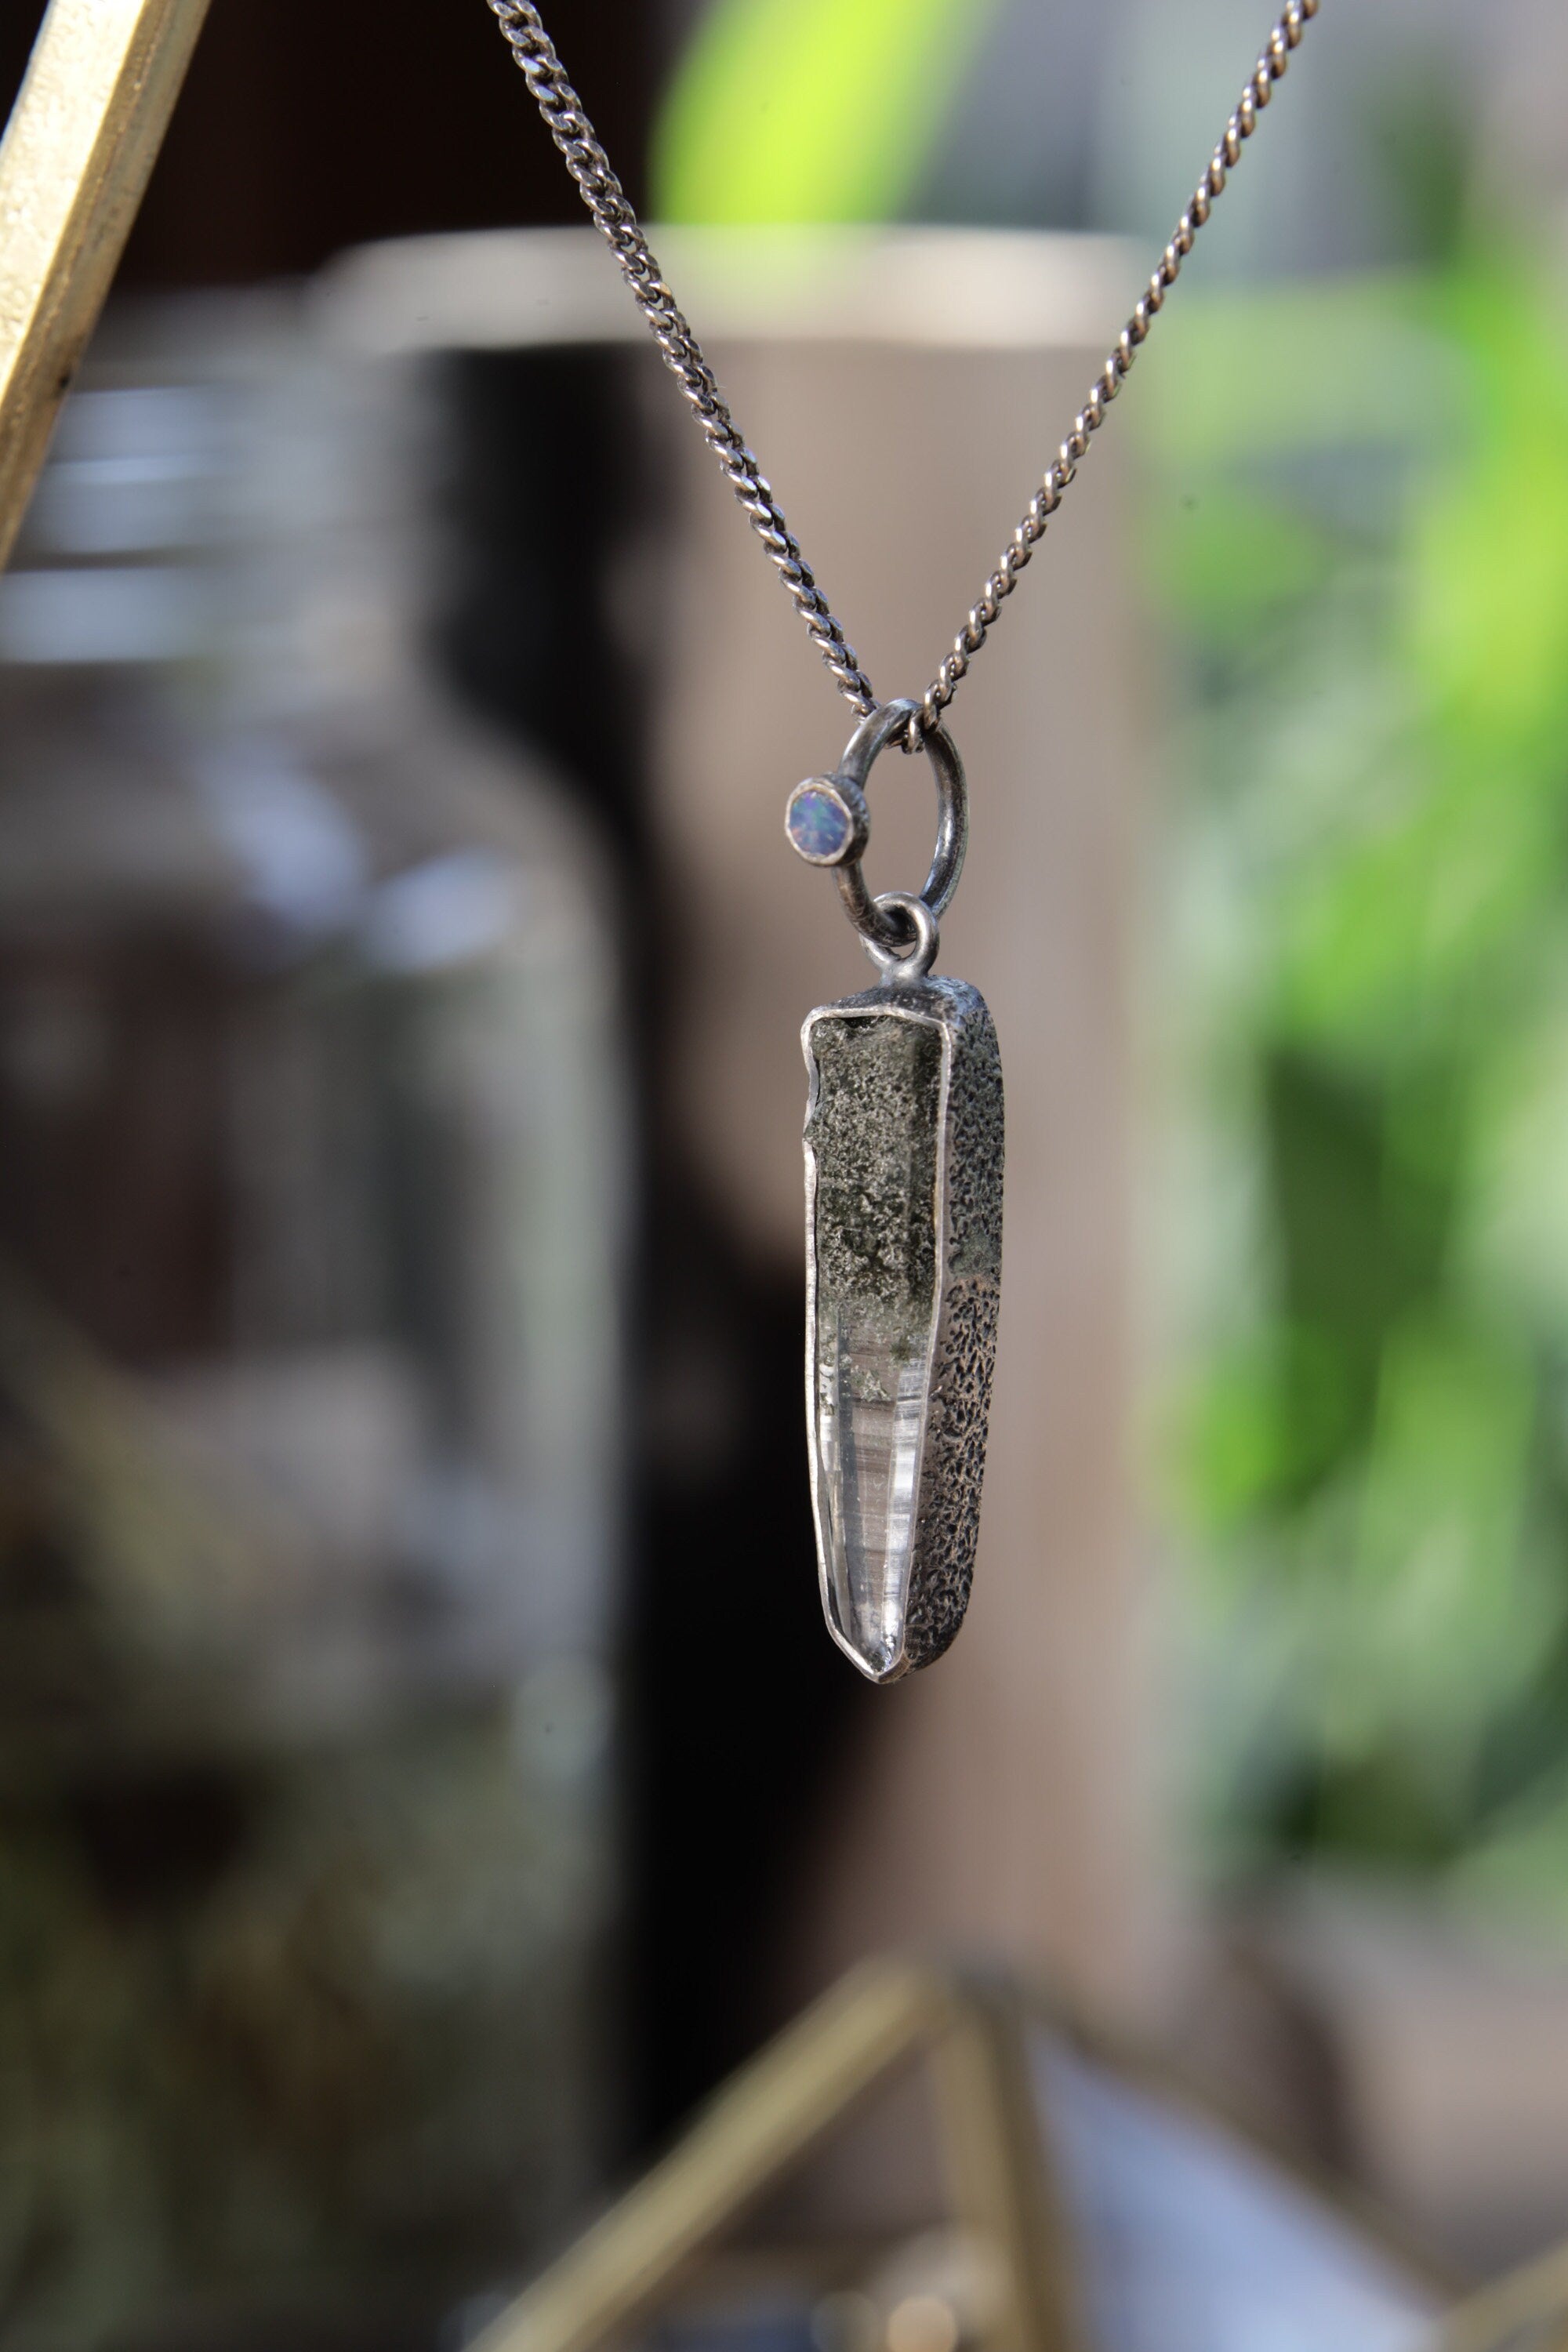 Himalayan Whisper: Sterling Silver Pendant with Himalayan Laser Quartz and Opal - Oxidized & Sand Textured